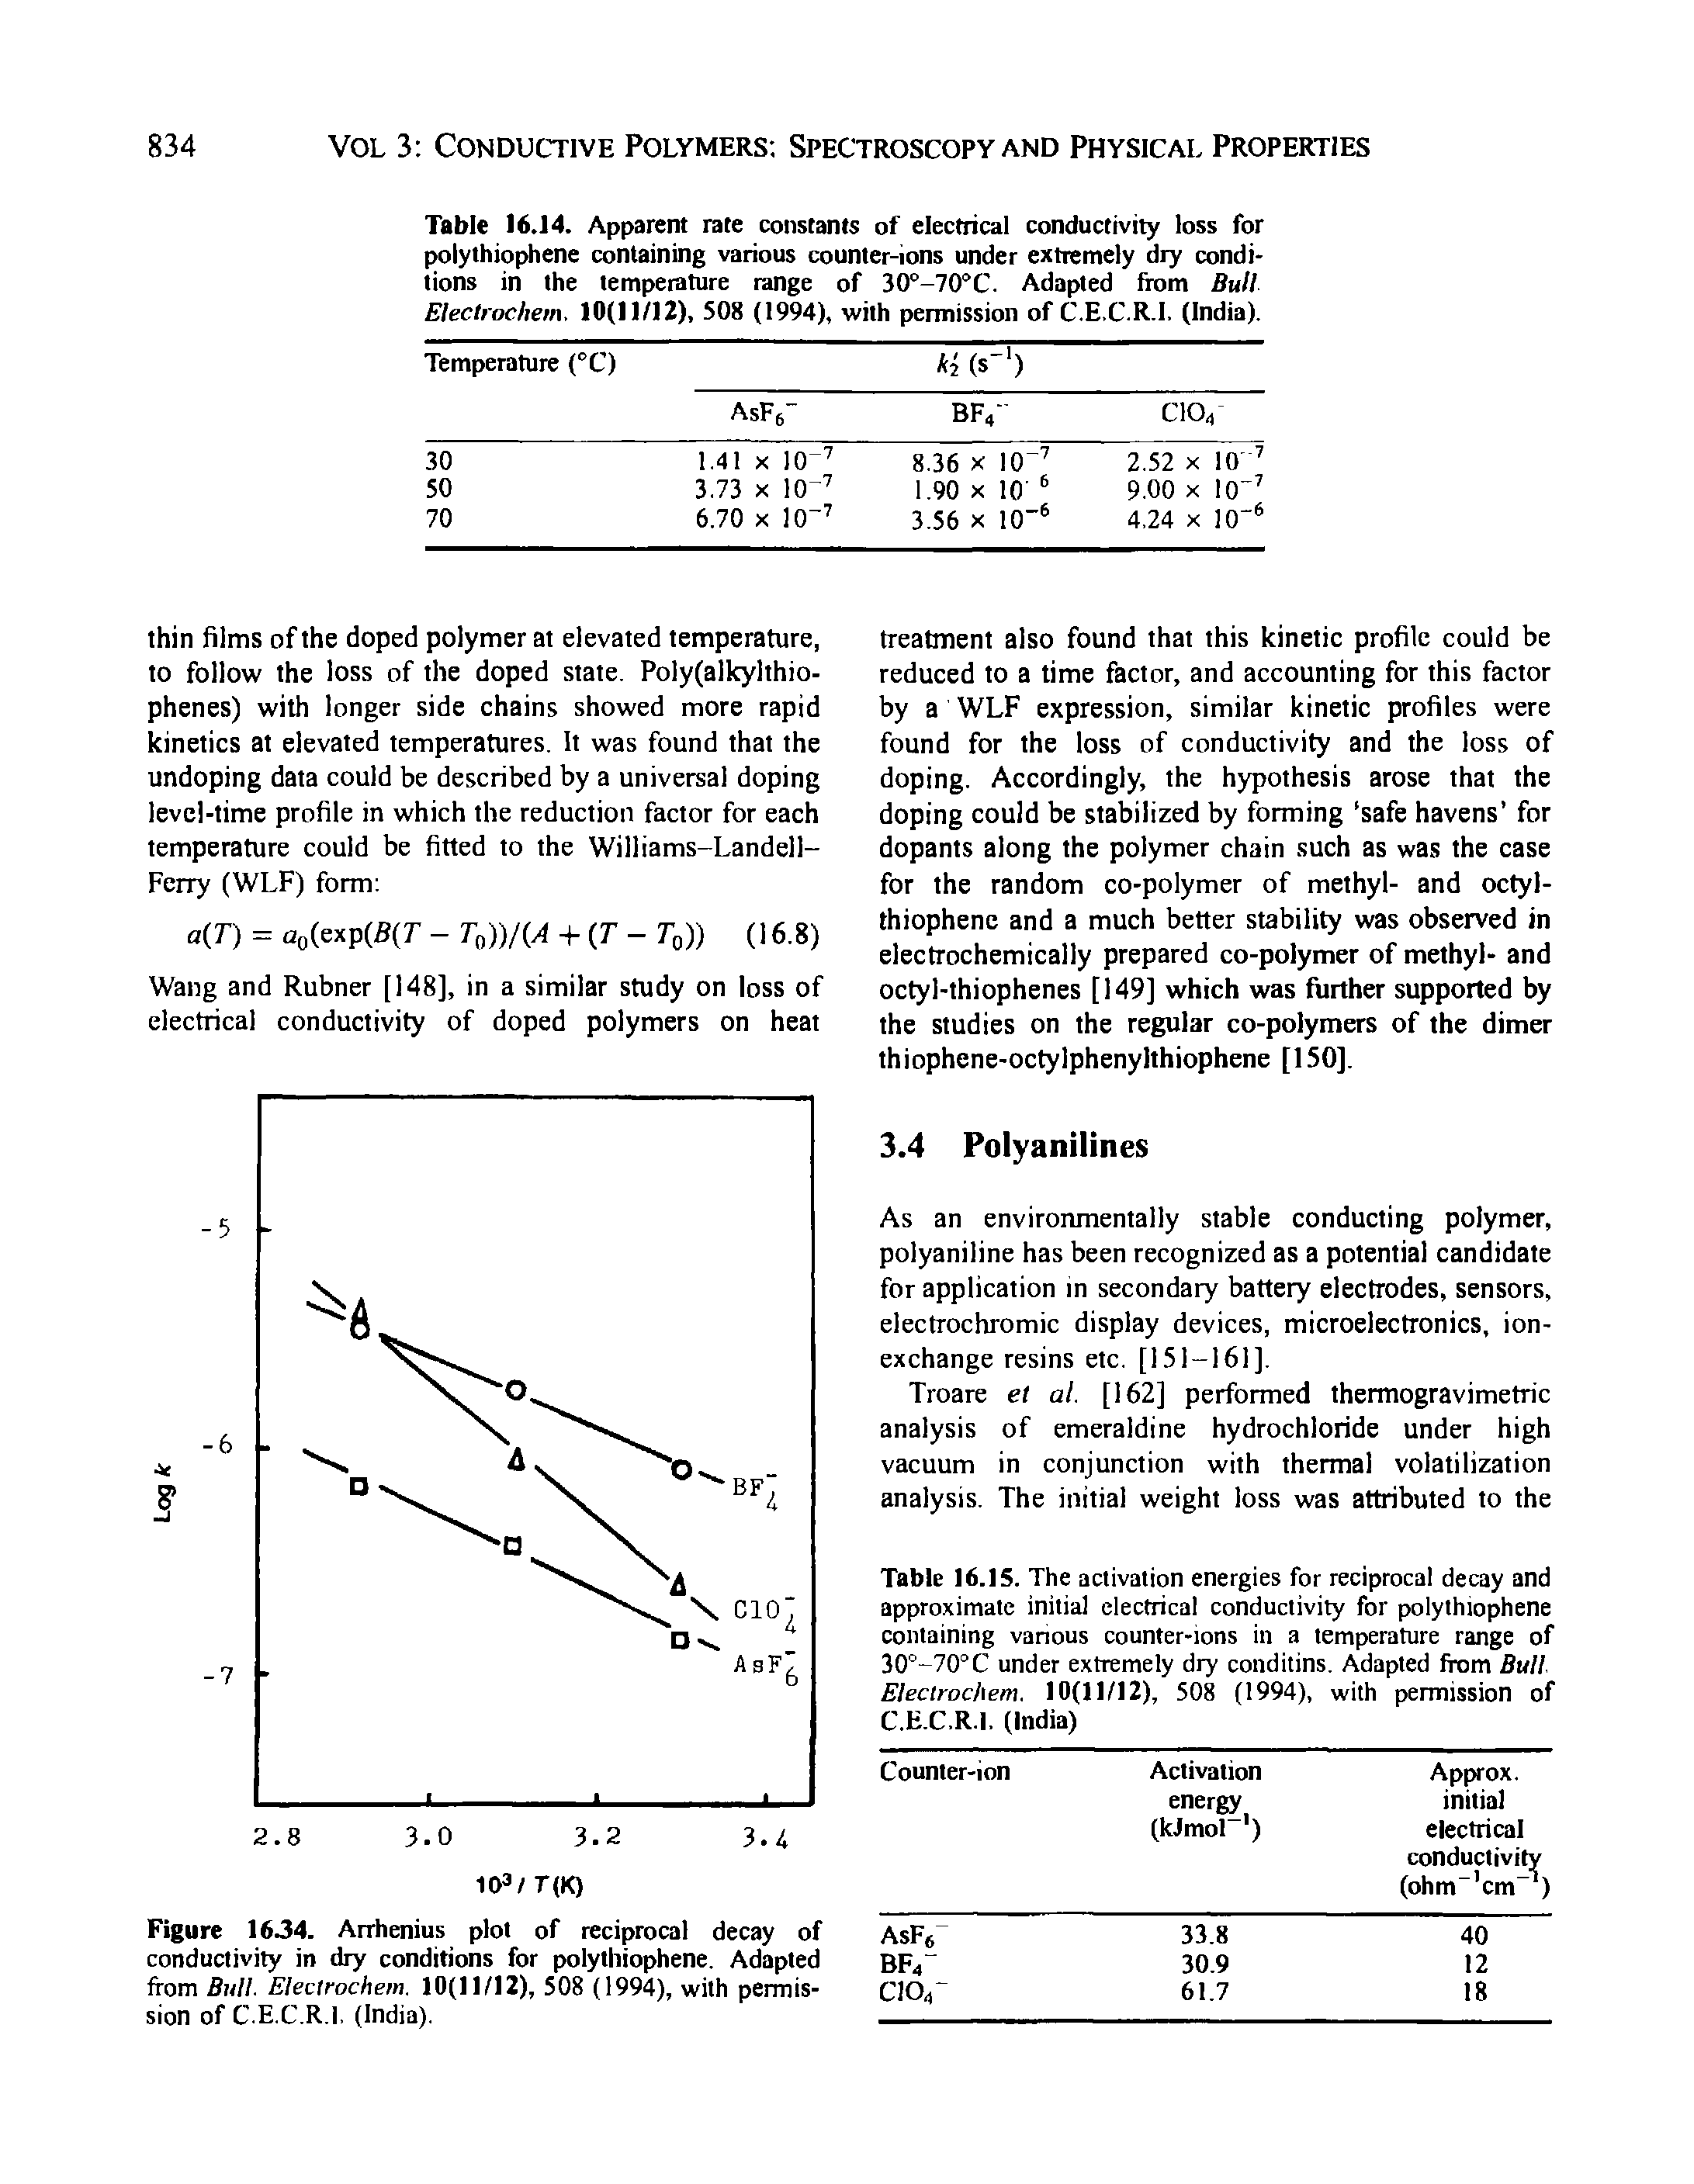 Figure 16J4. Arrhenius plot of reciprocal decay of conductivity in dry conditions for polythiophene. Adapted from Bull. Electrochem. 10(11/12), 508 (1994), with permission of C.E.C.R.I. (India).